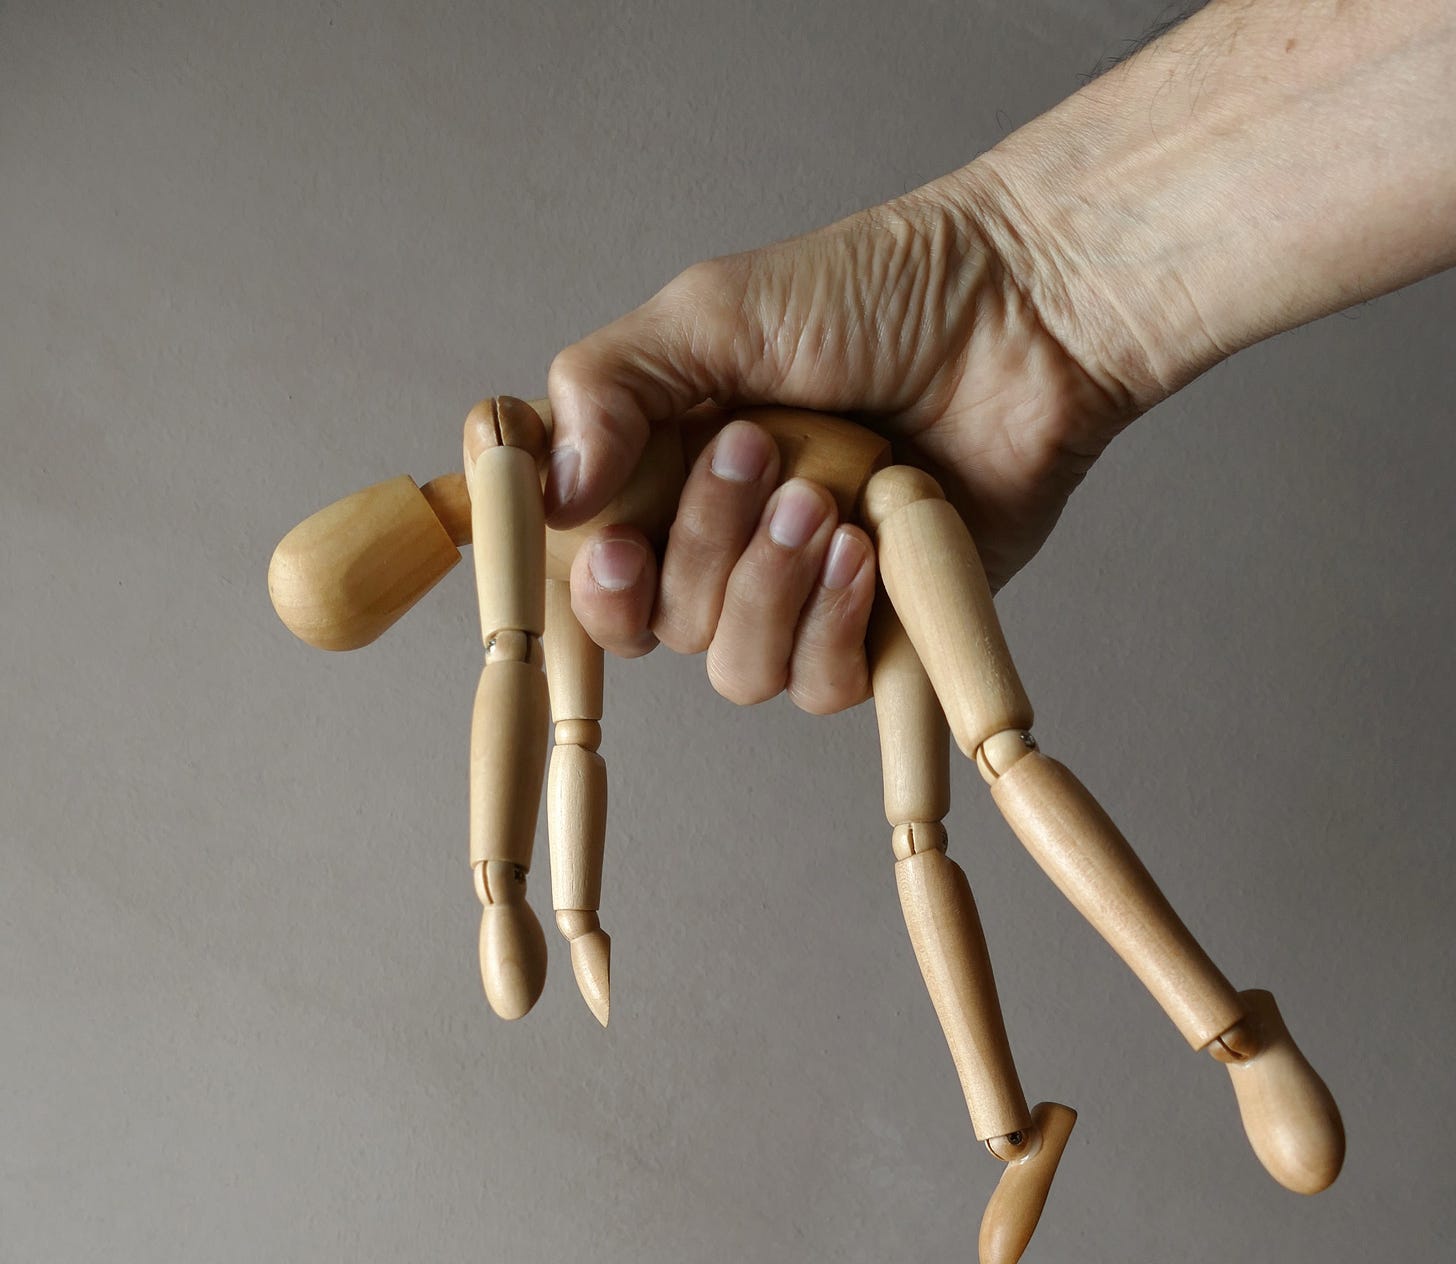 Man's hand crushing wooden doll